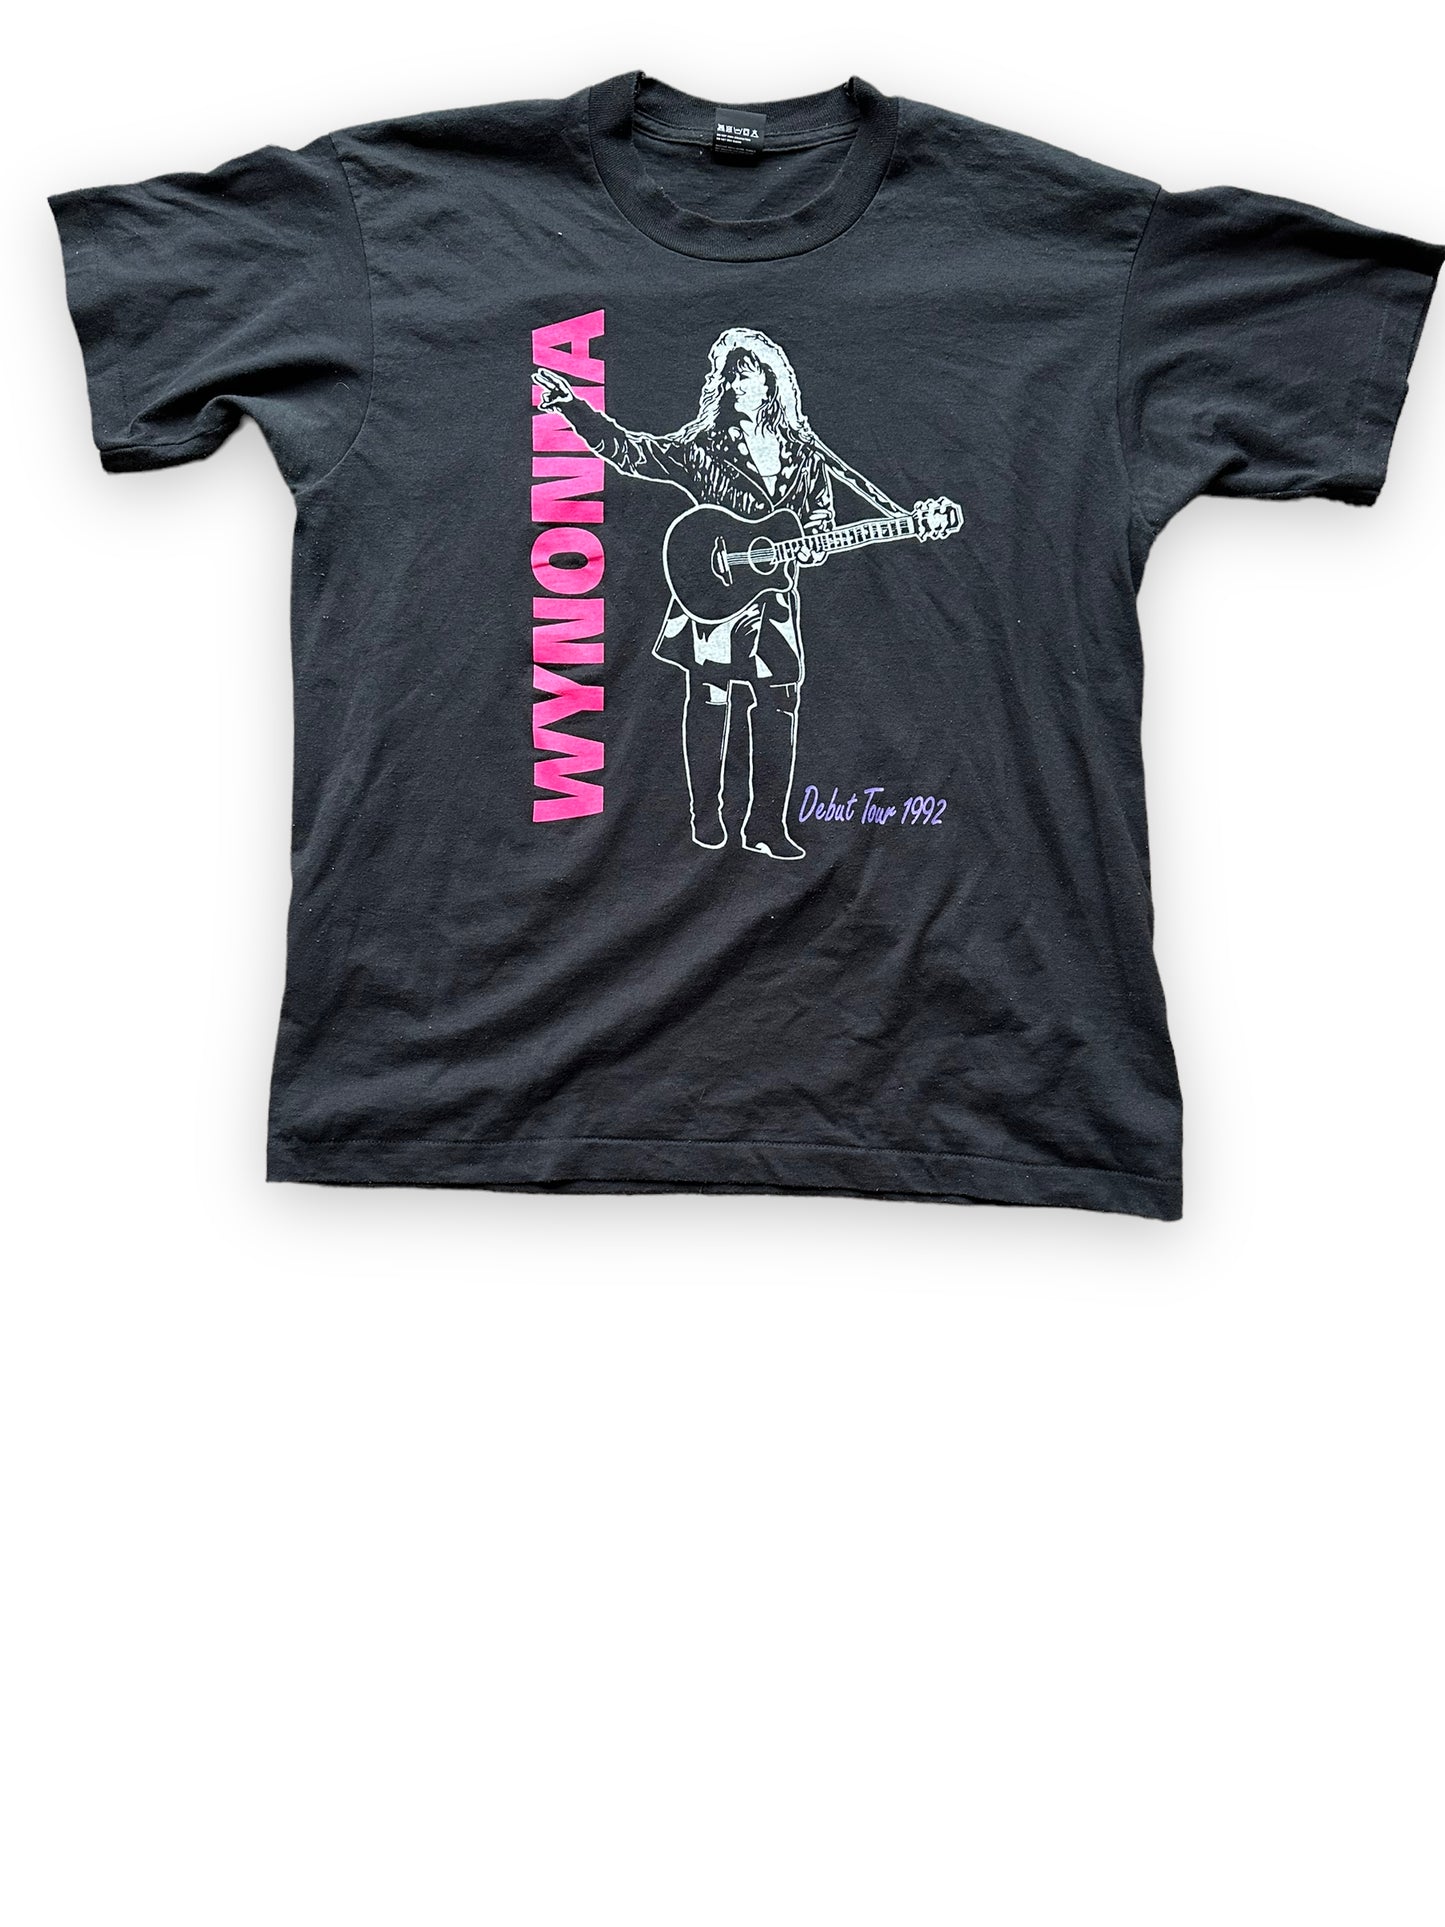 Front View of Vintage Wynonna Judd 1992 Debut Tour Tee SZ XL | Country Music T-Shirts Seattle | Barn Owl Vintage Goods